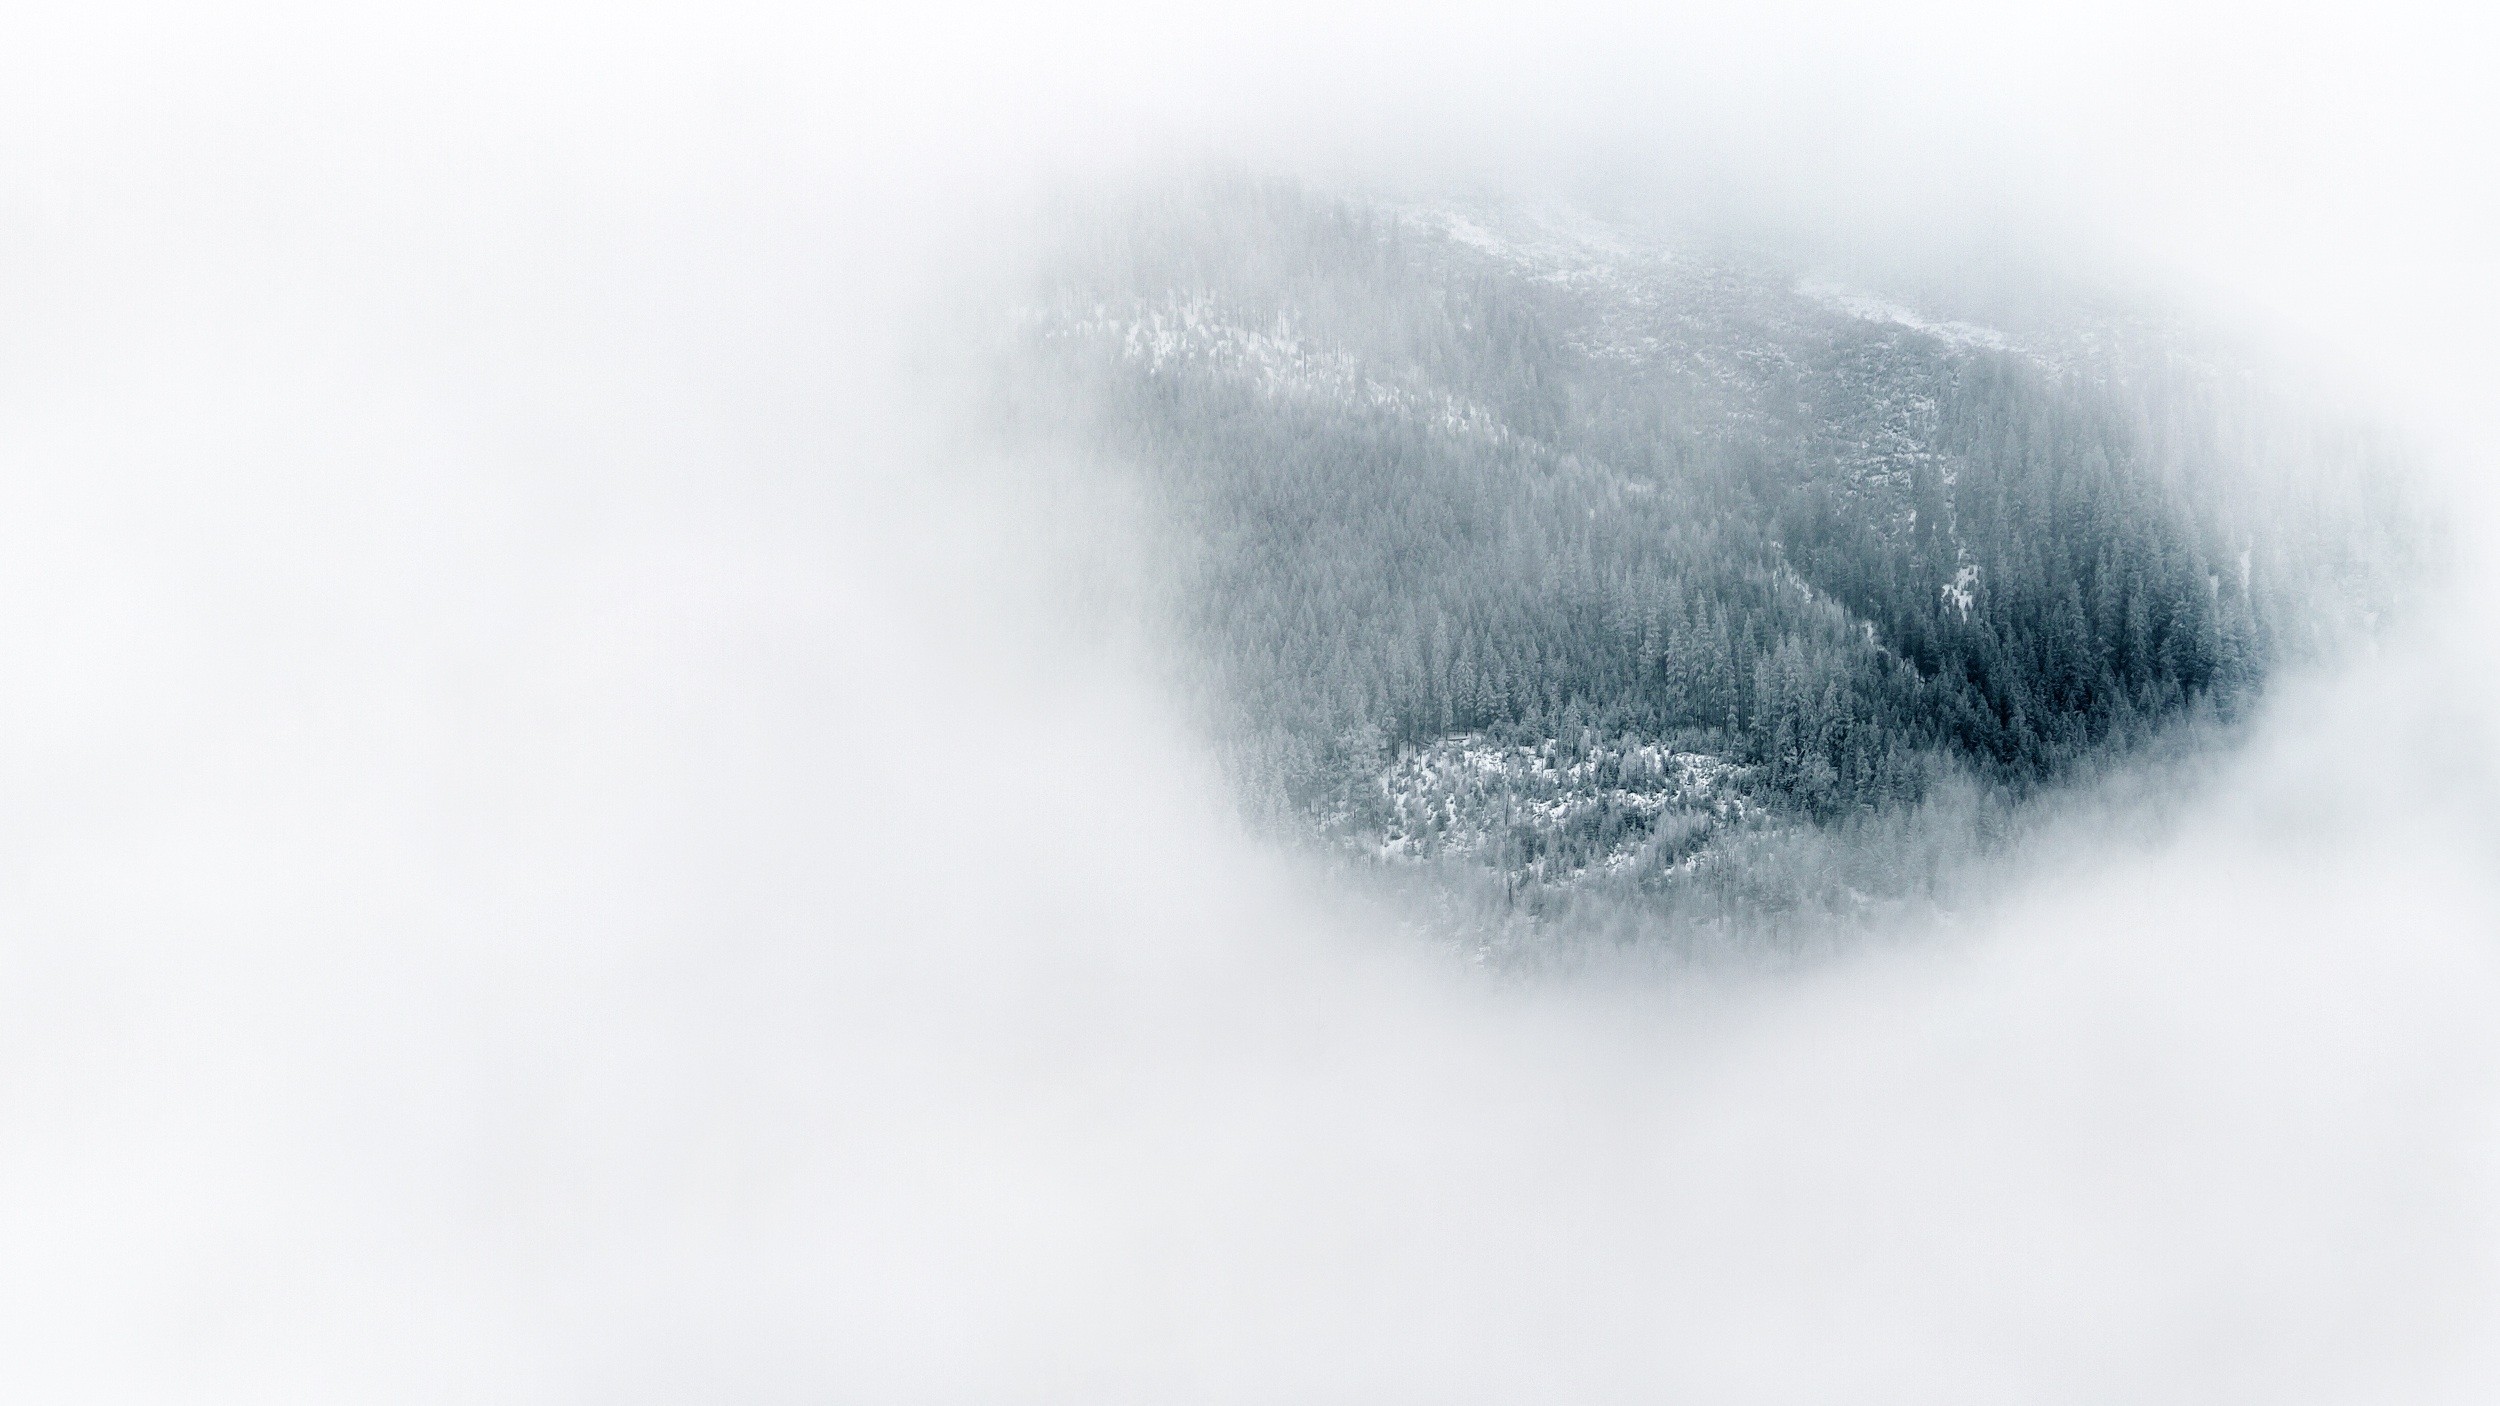 General 2500x1406 nature landscape trees forest mist white background winter snow pine trees aerial view hills